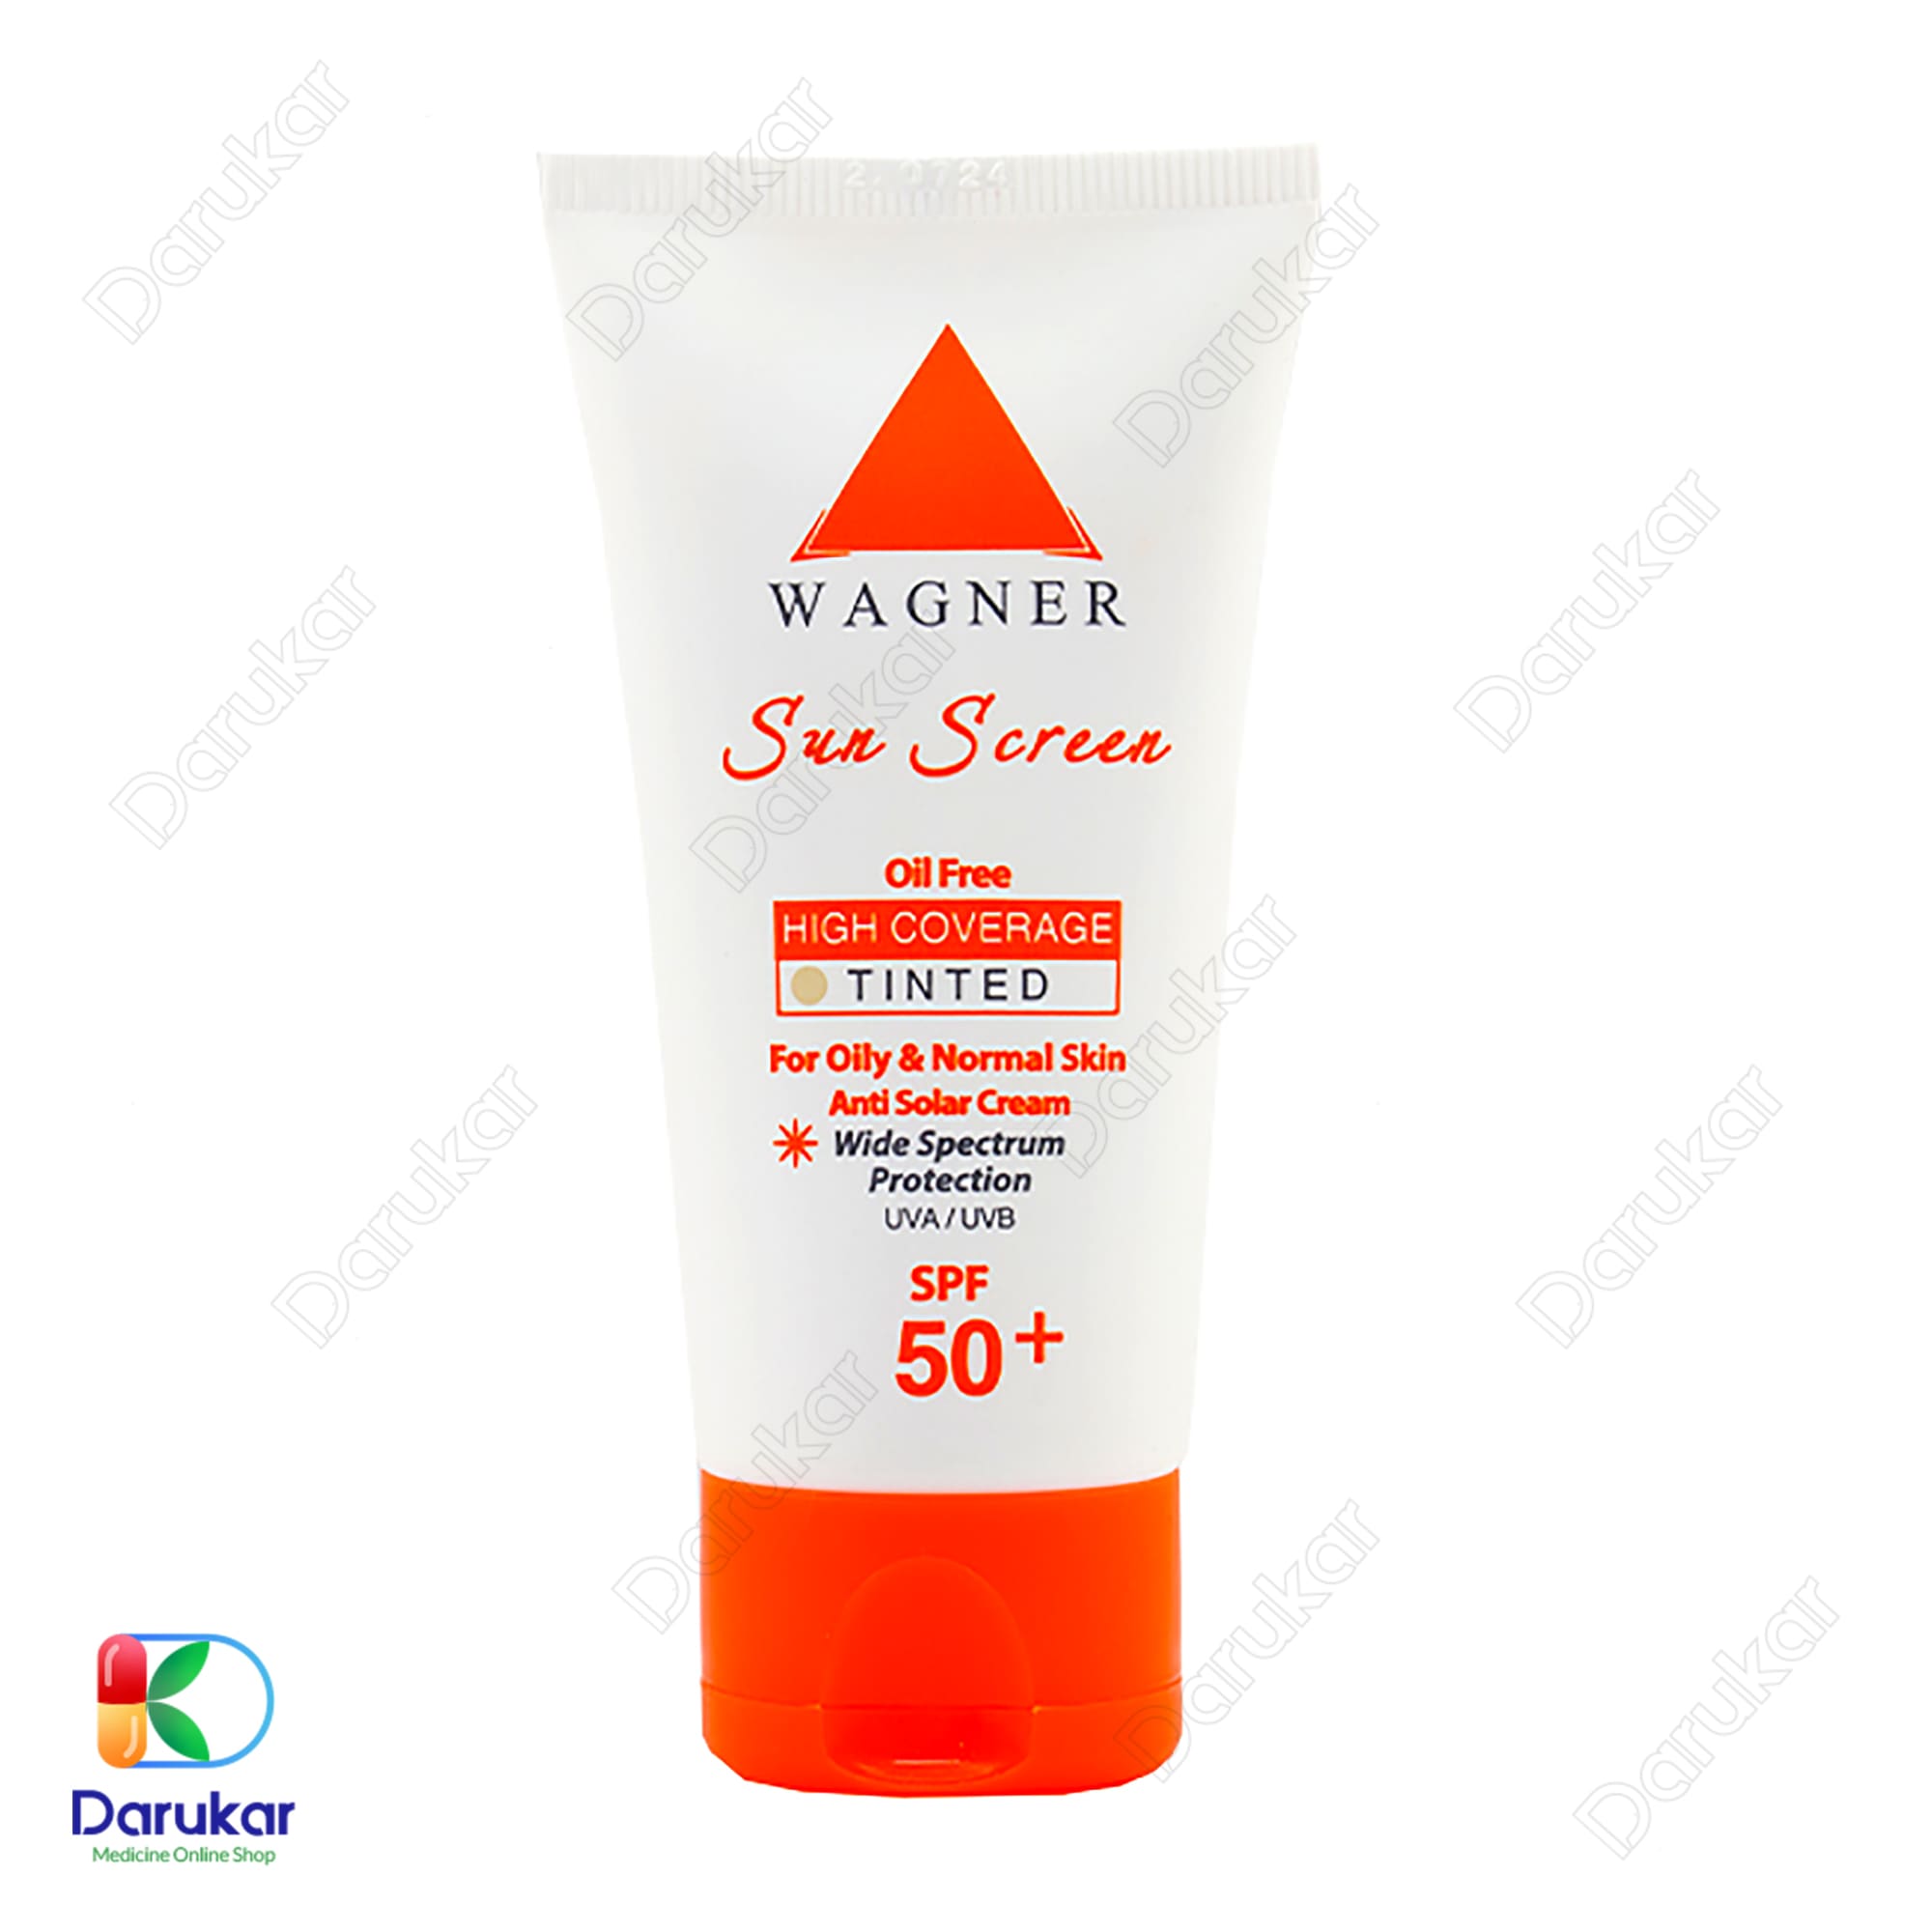 Wagner Sunscreen For Oily And Normal Skin SPF50 min 1